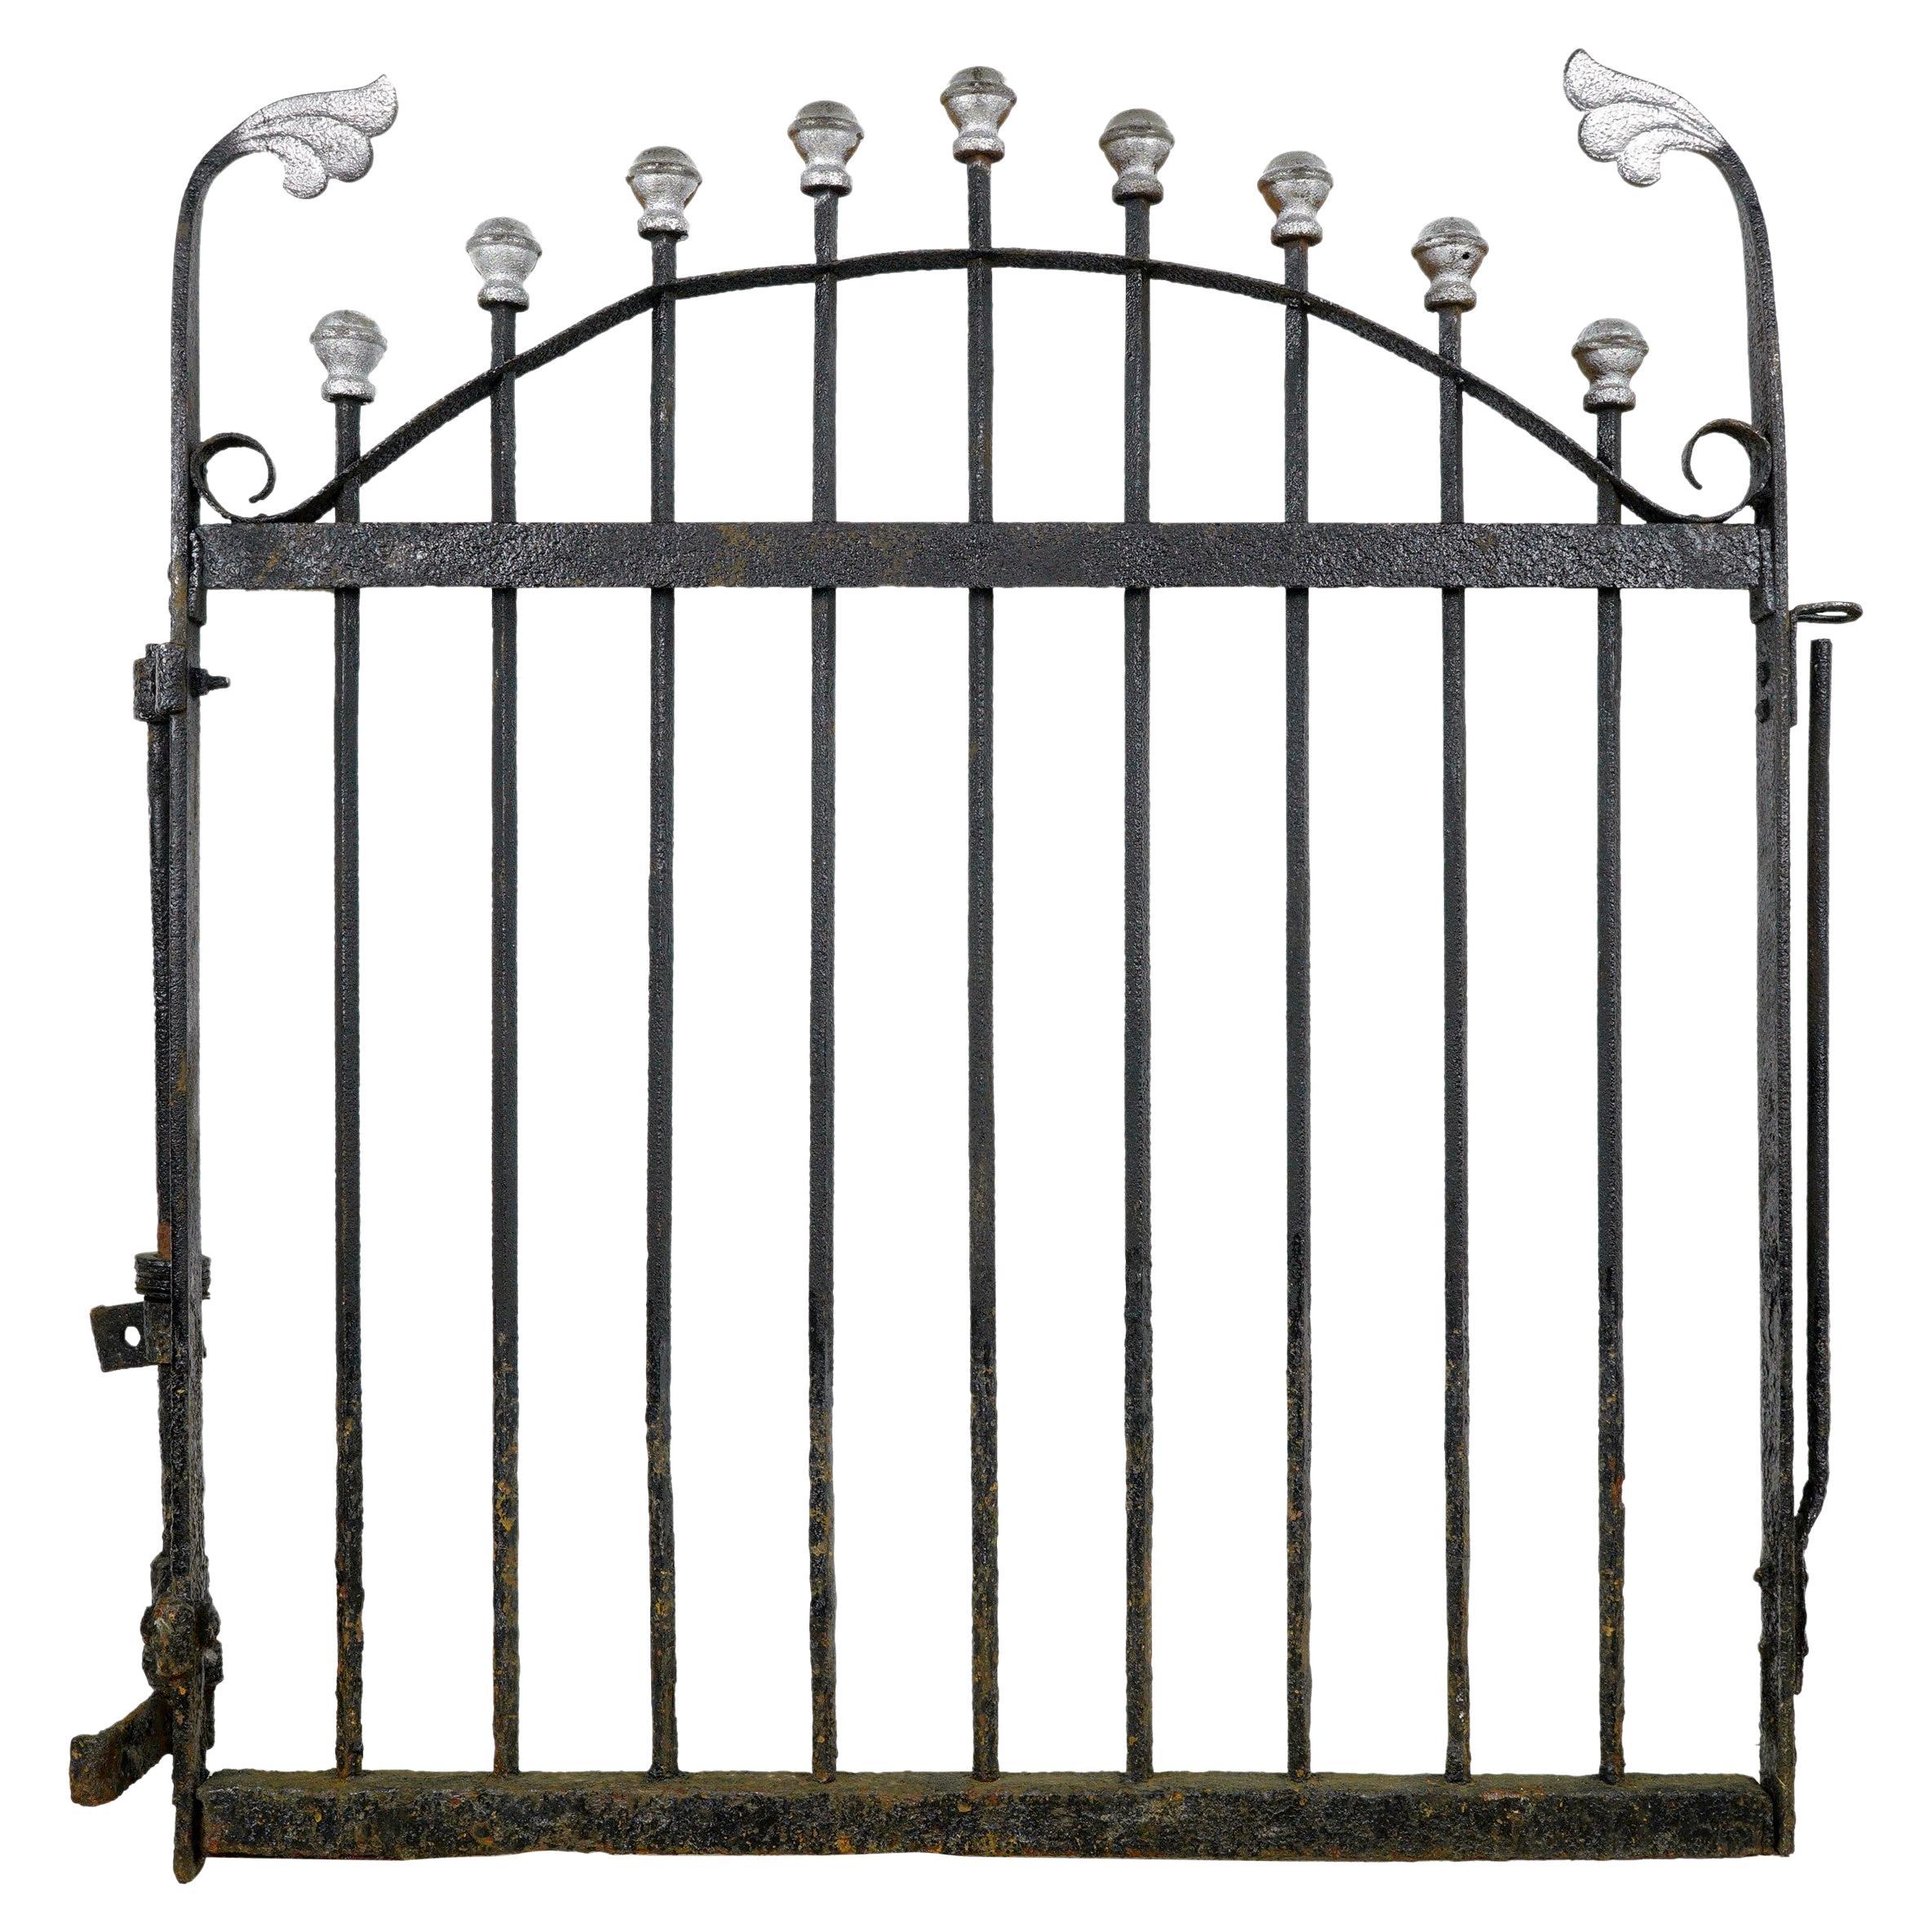 37 in. Wrought Iron Privacy Yard Gate w Ball Finials 